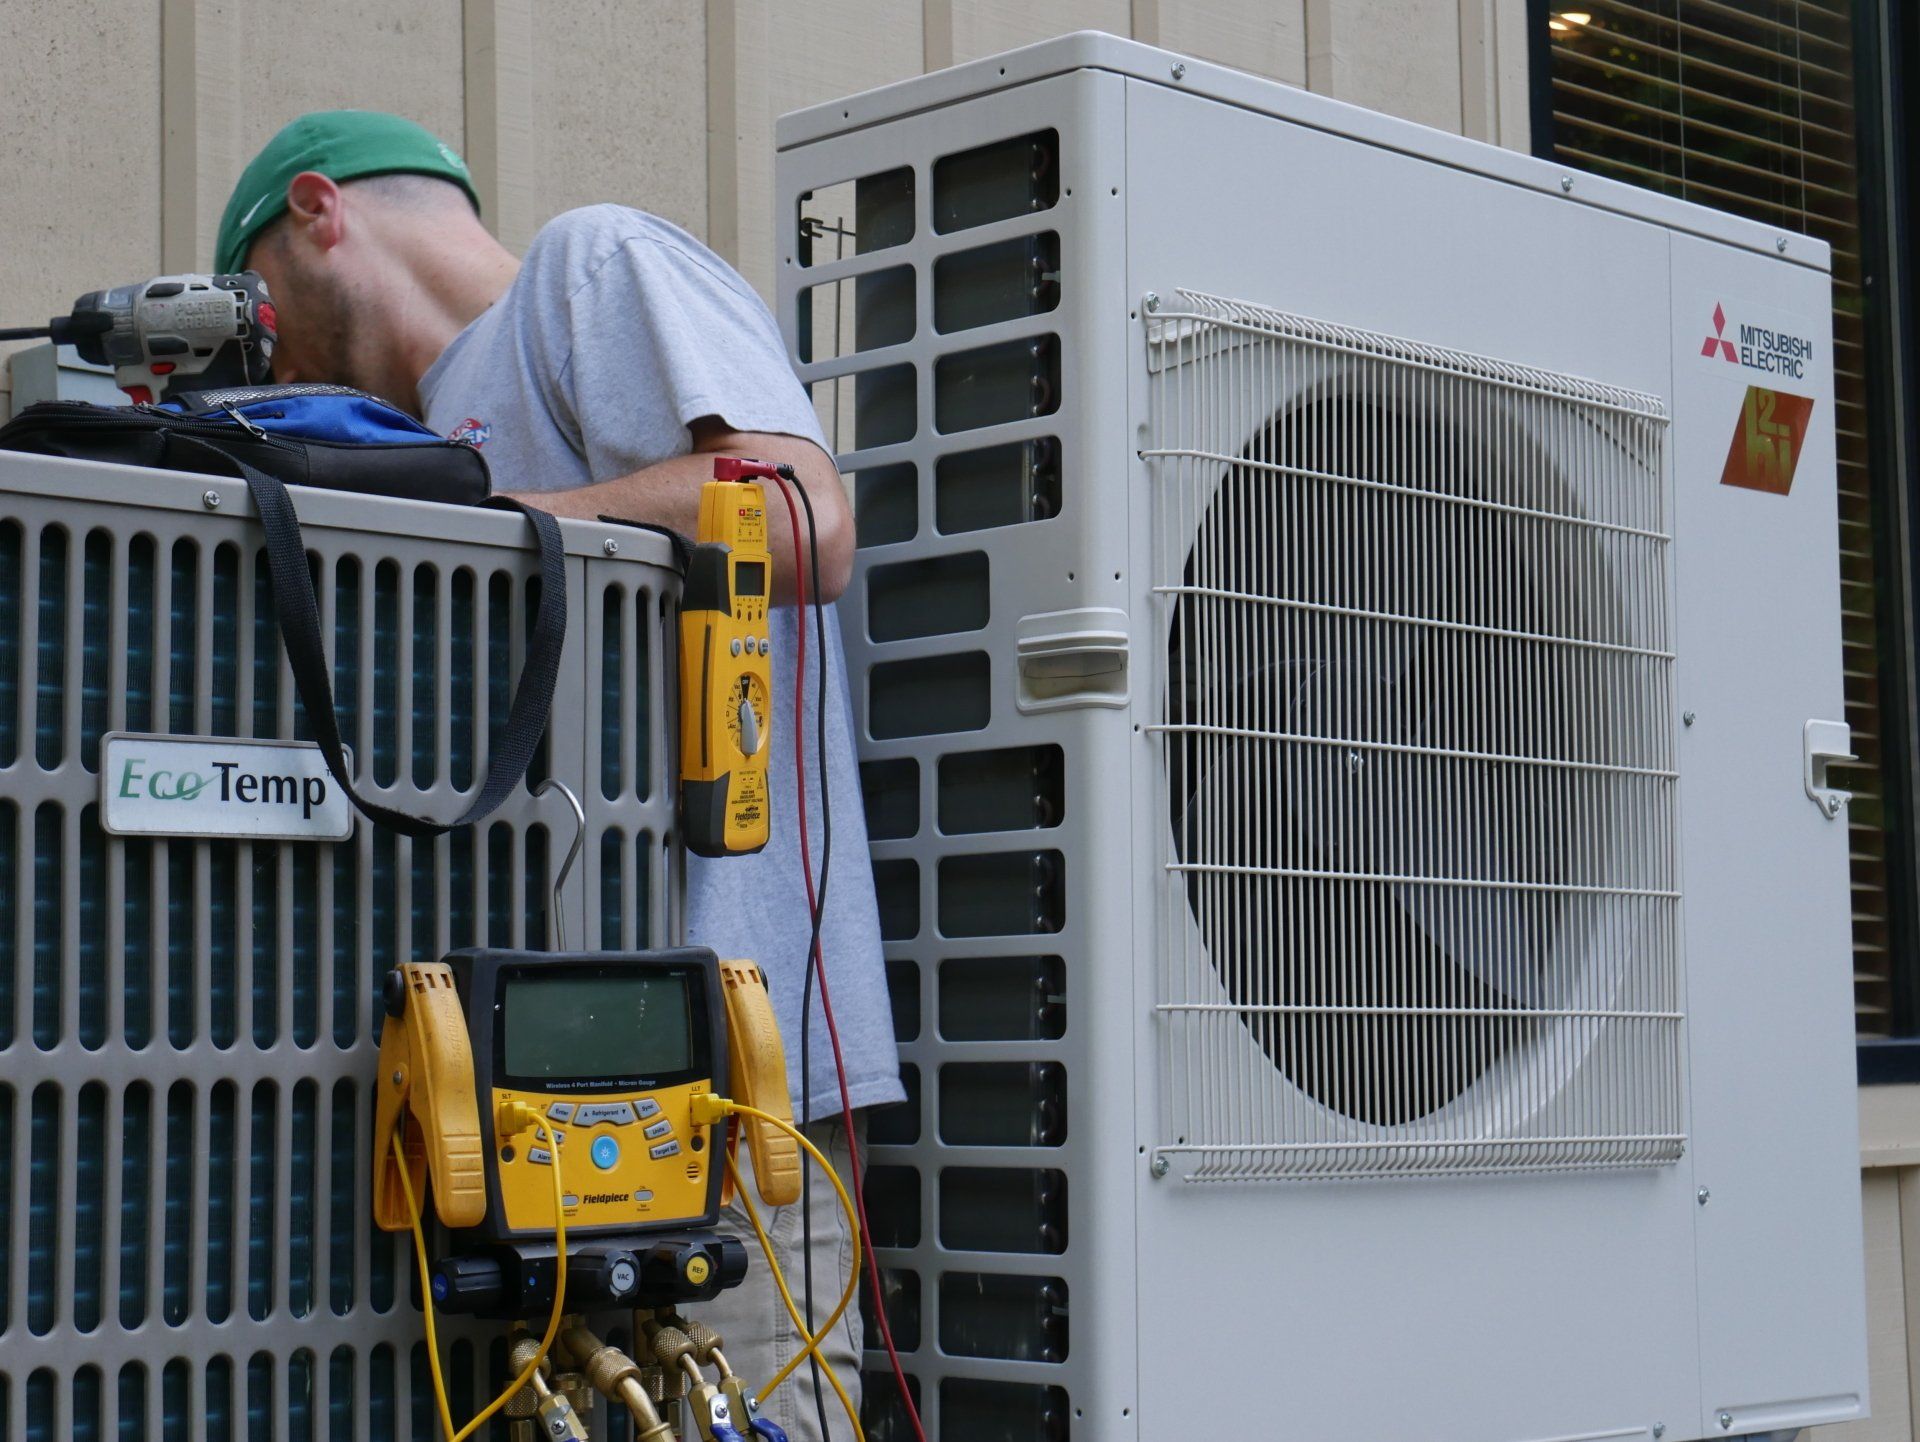 A man is working on an air conditioner outside of a building.